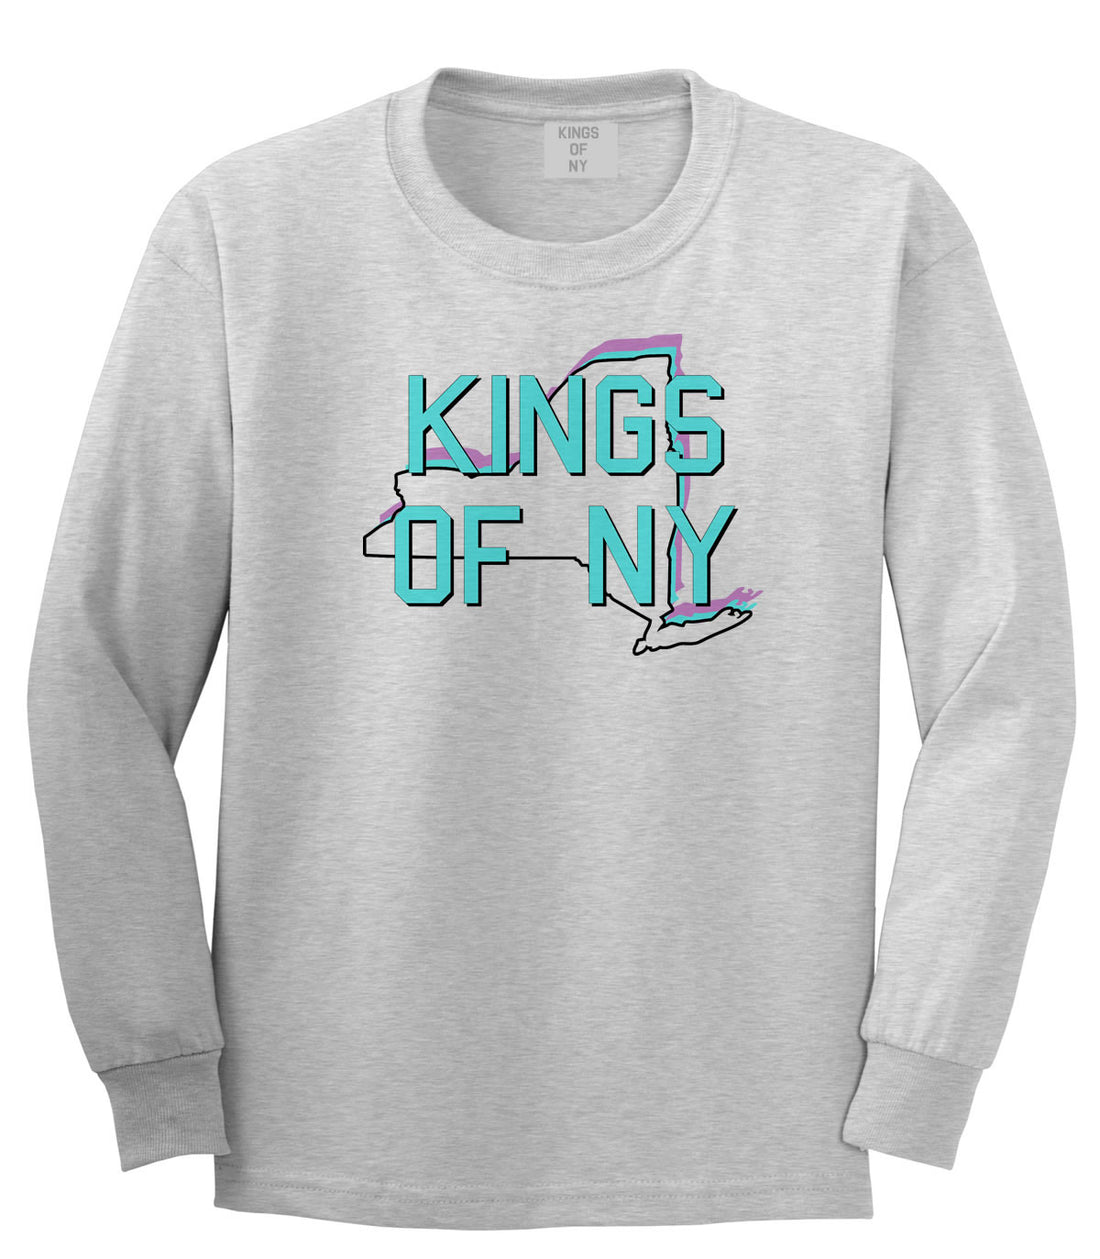 New York State Outline Boys Kids Long Sleeve T-Shirt in Grey by Kings Of NY